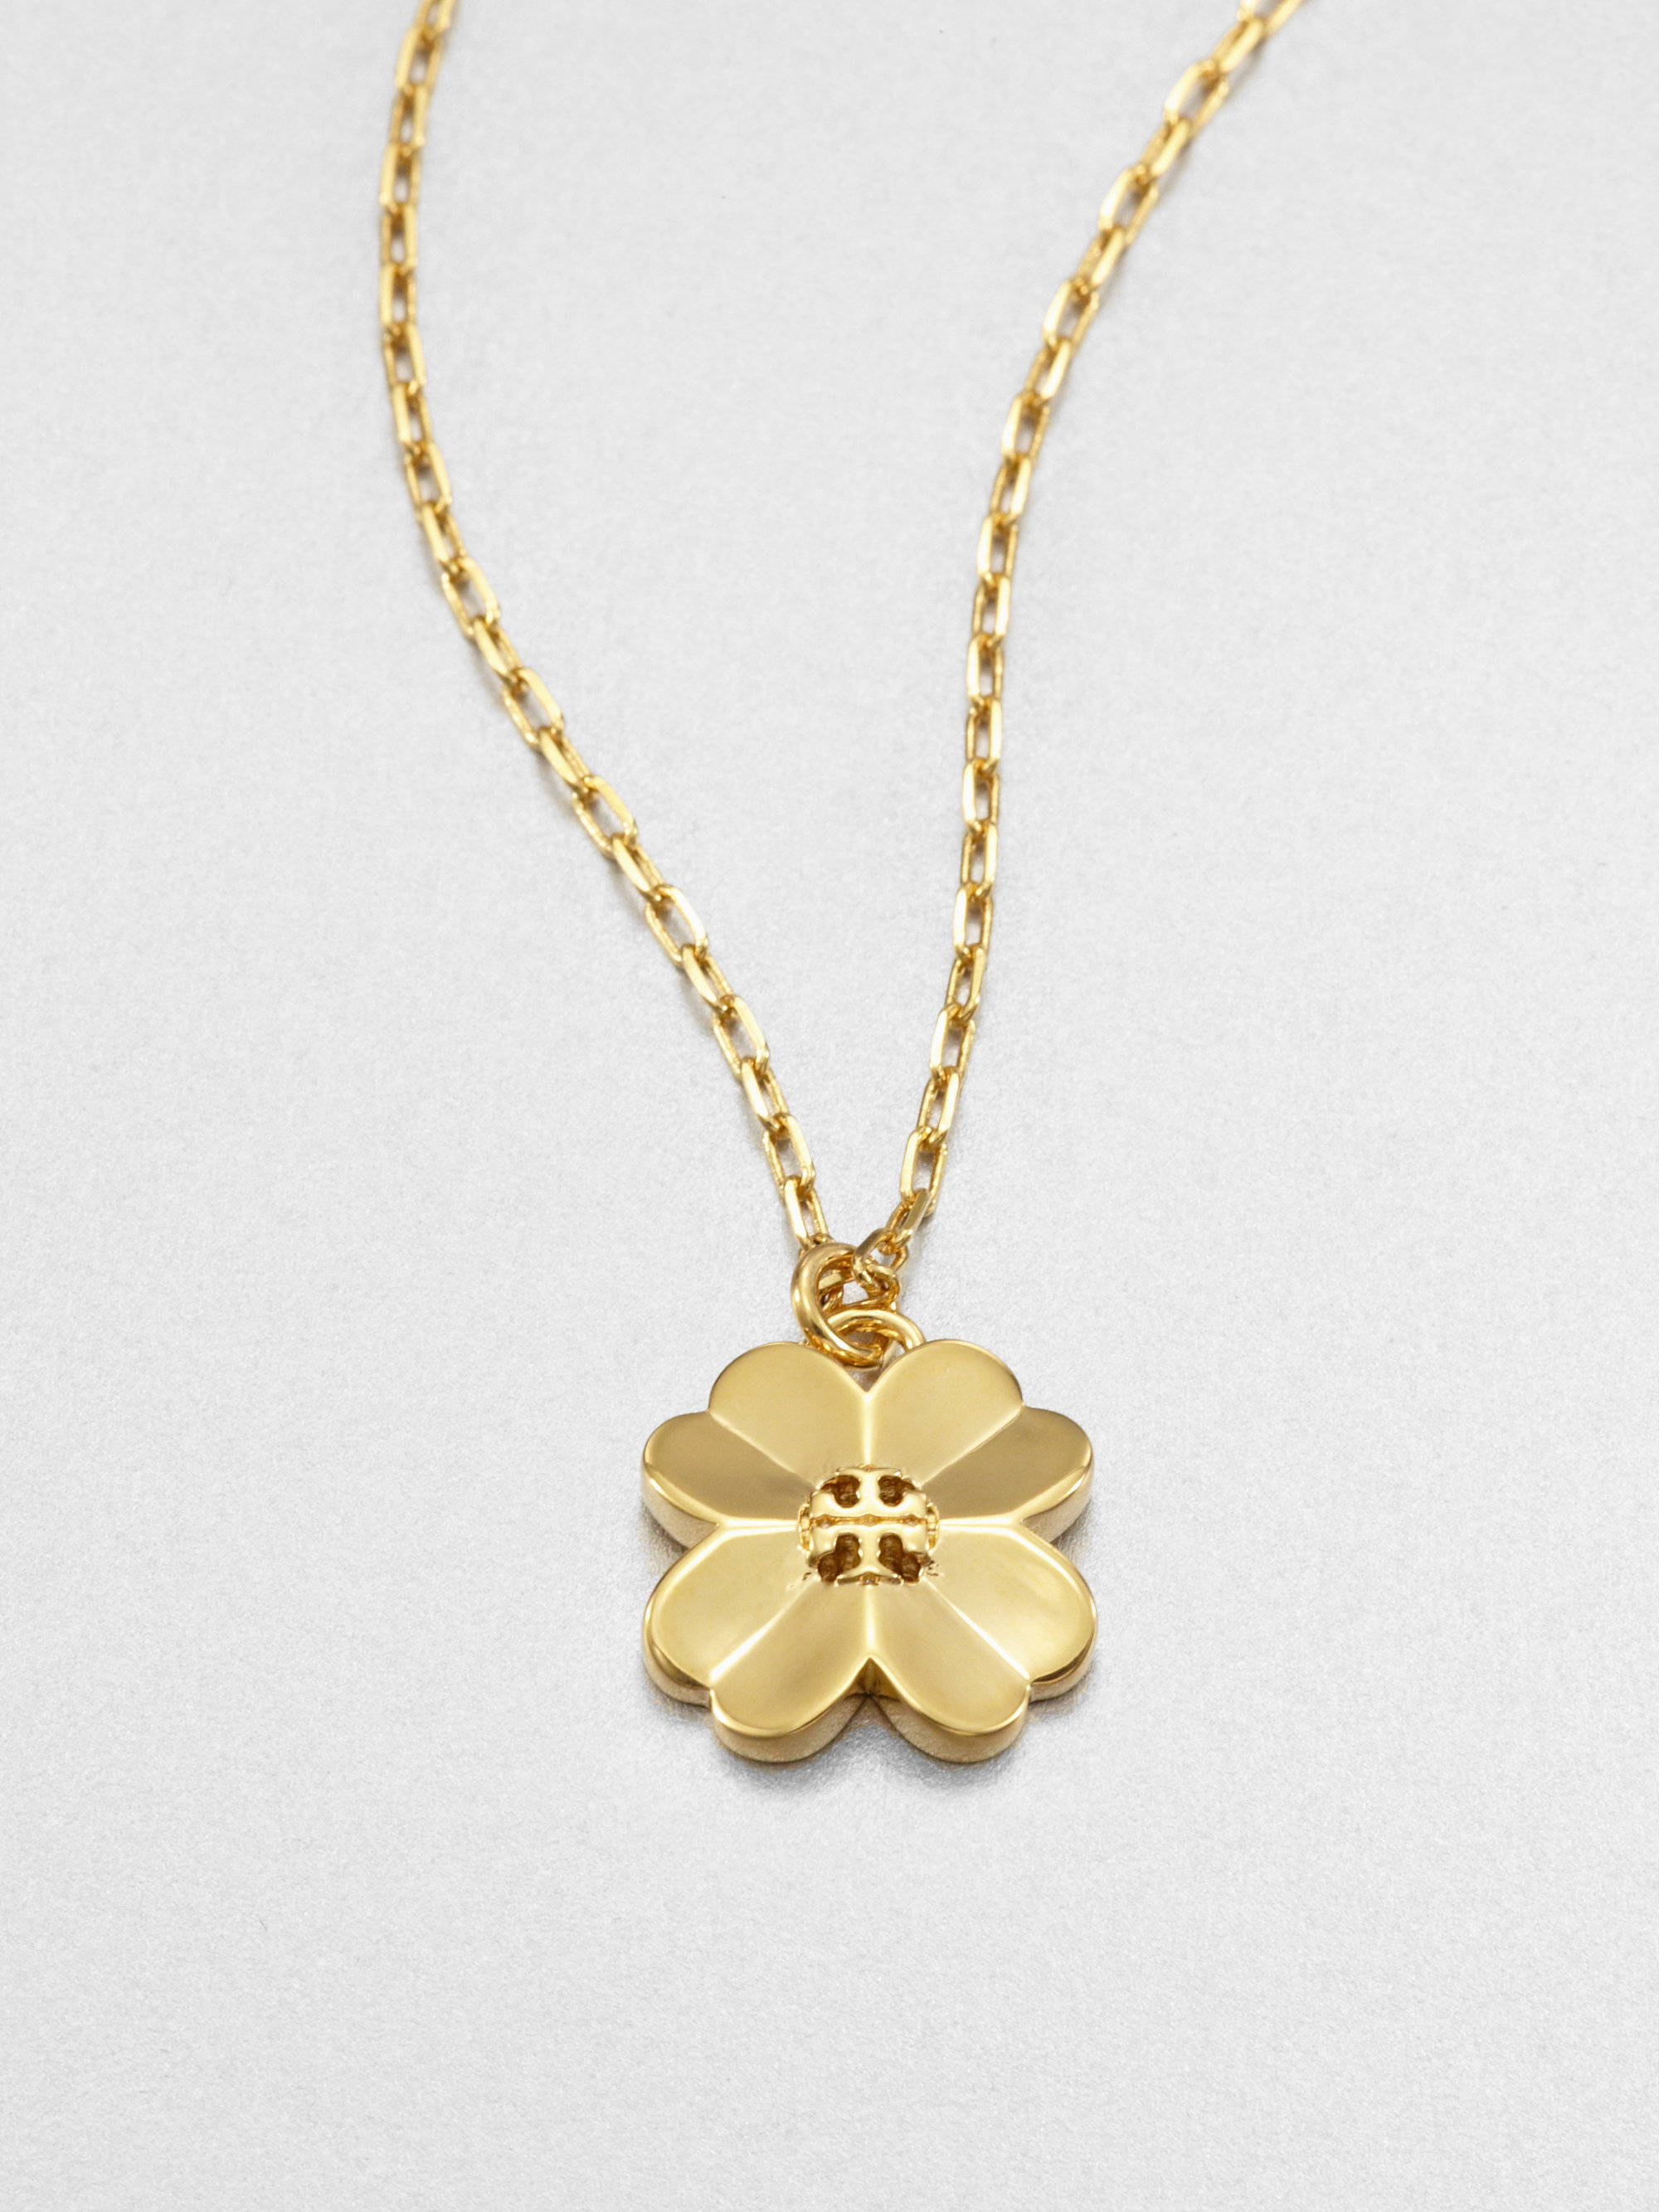 Tory burch Shawn Short Clover Necklace in Metallic | Lyst